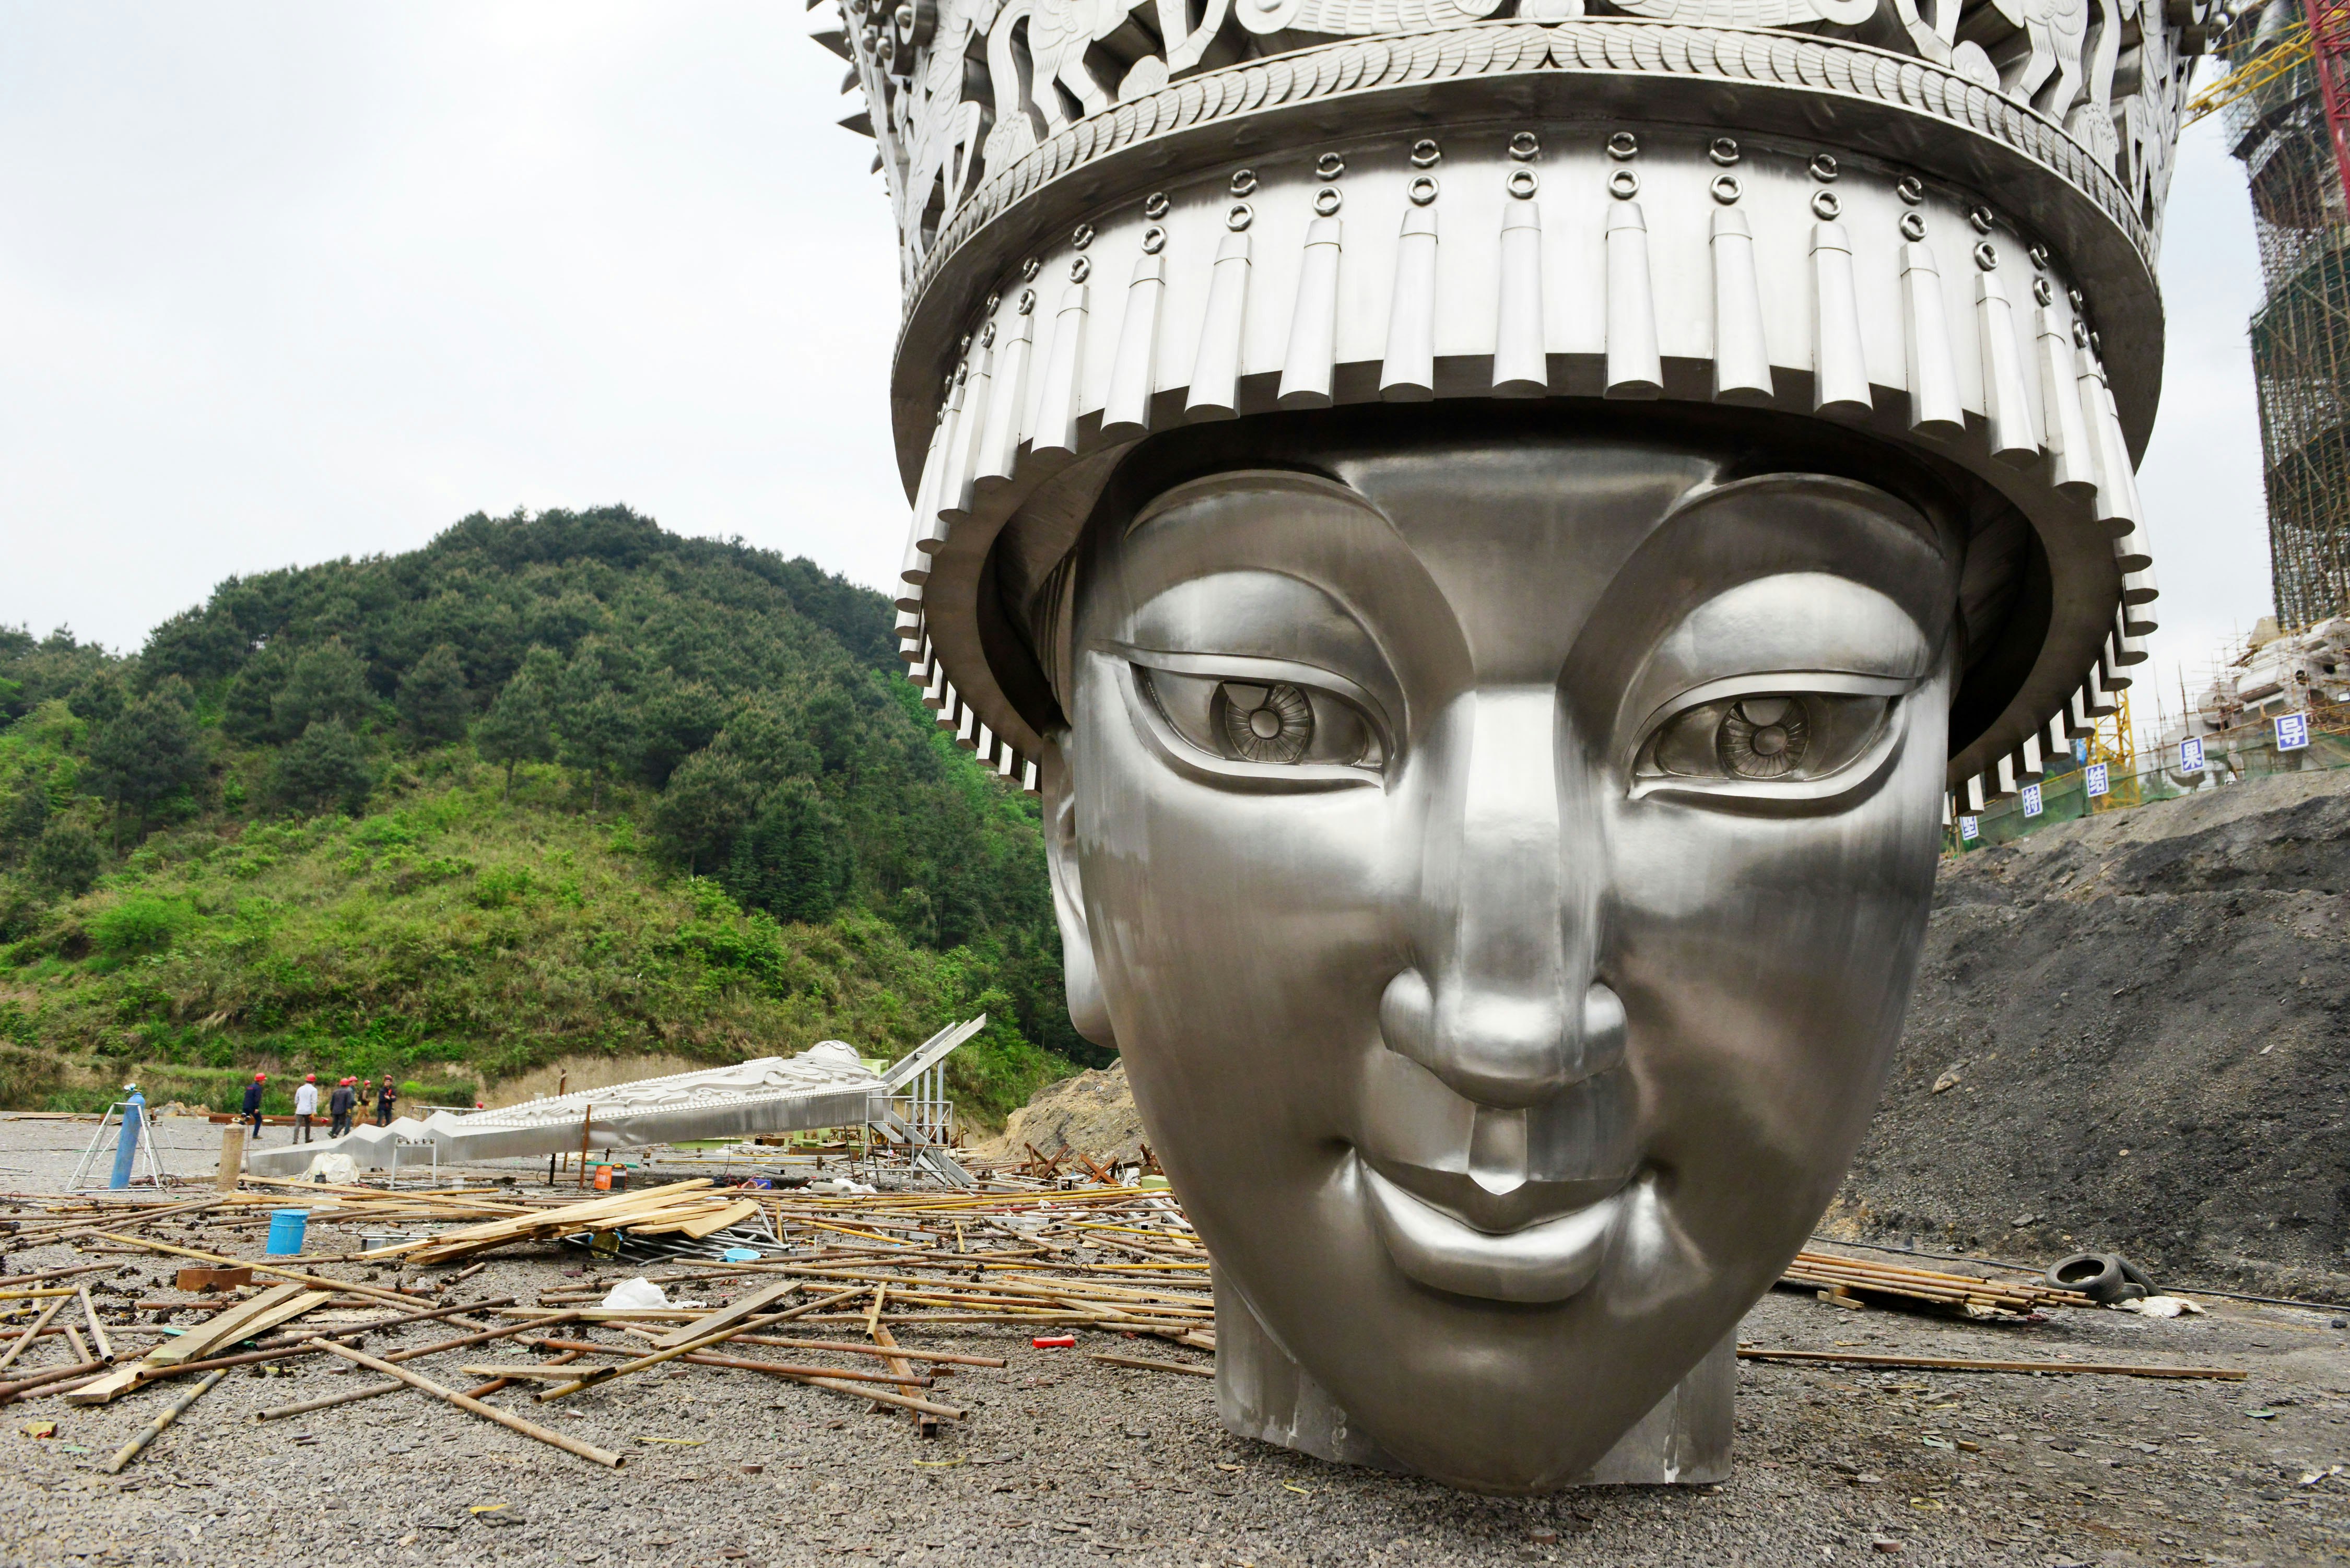 A close-up of Yang'asha's head before being added to the construction site.